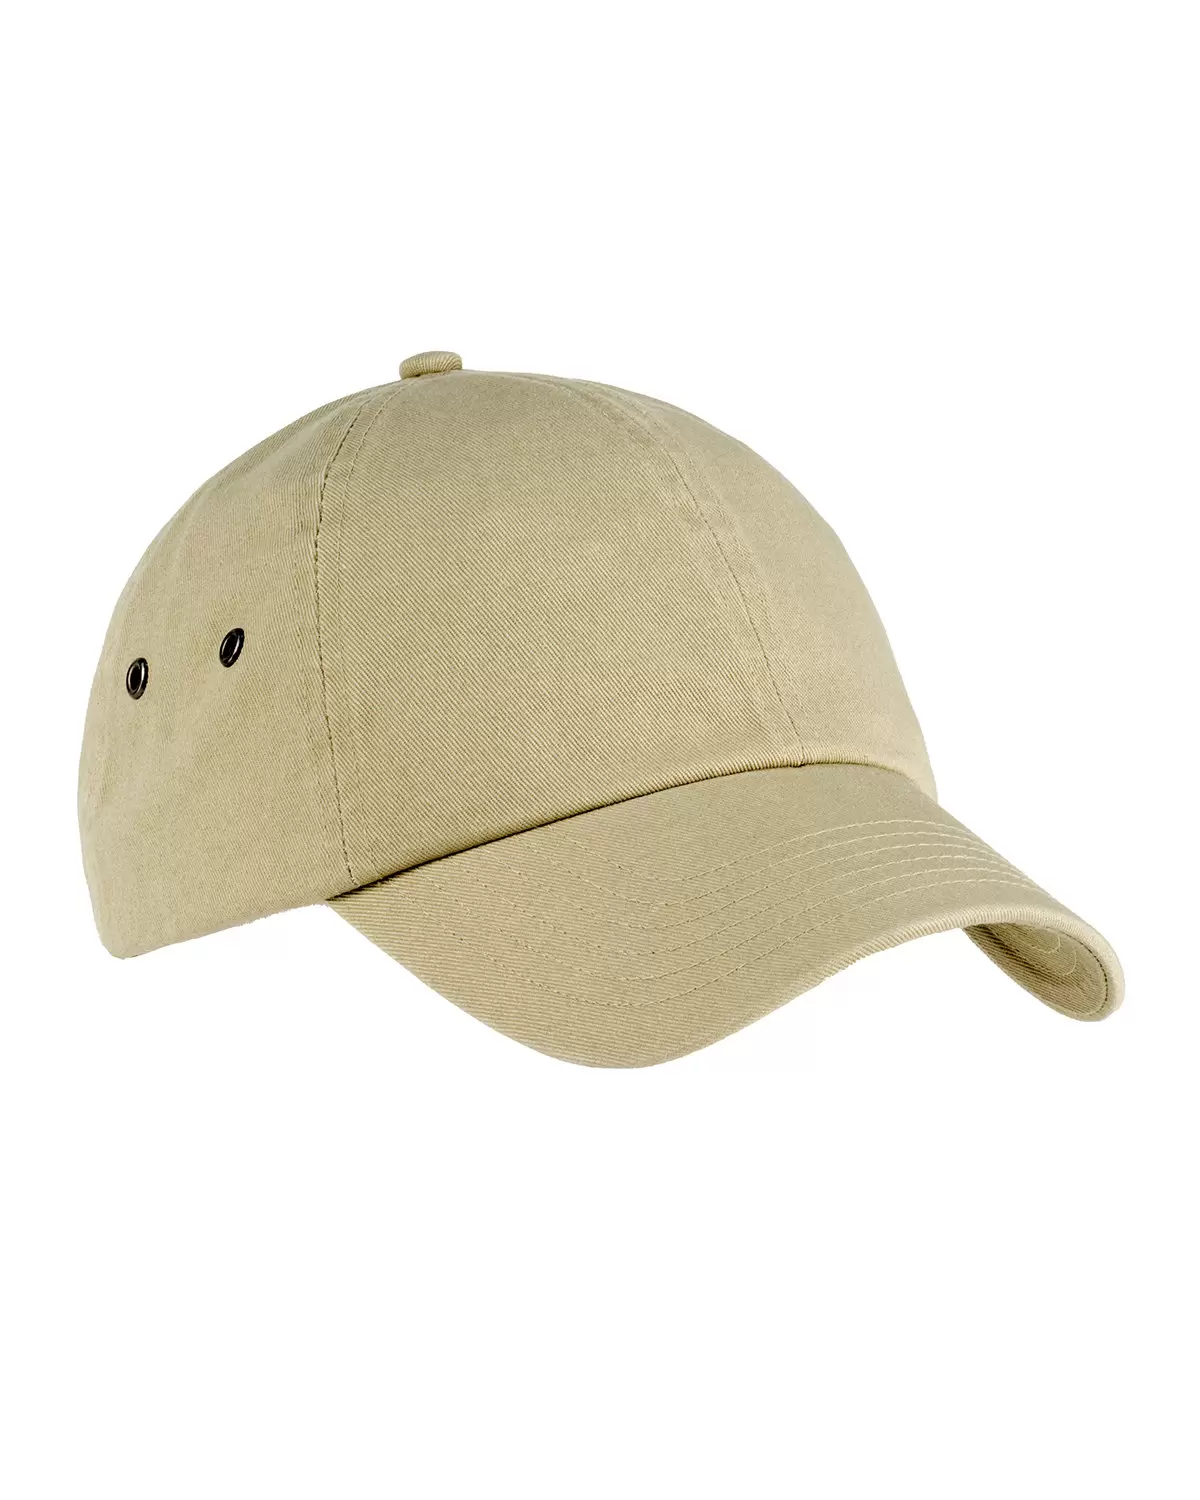 Washed Big BA529 Cap - Accessories Baseball From